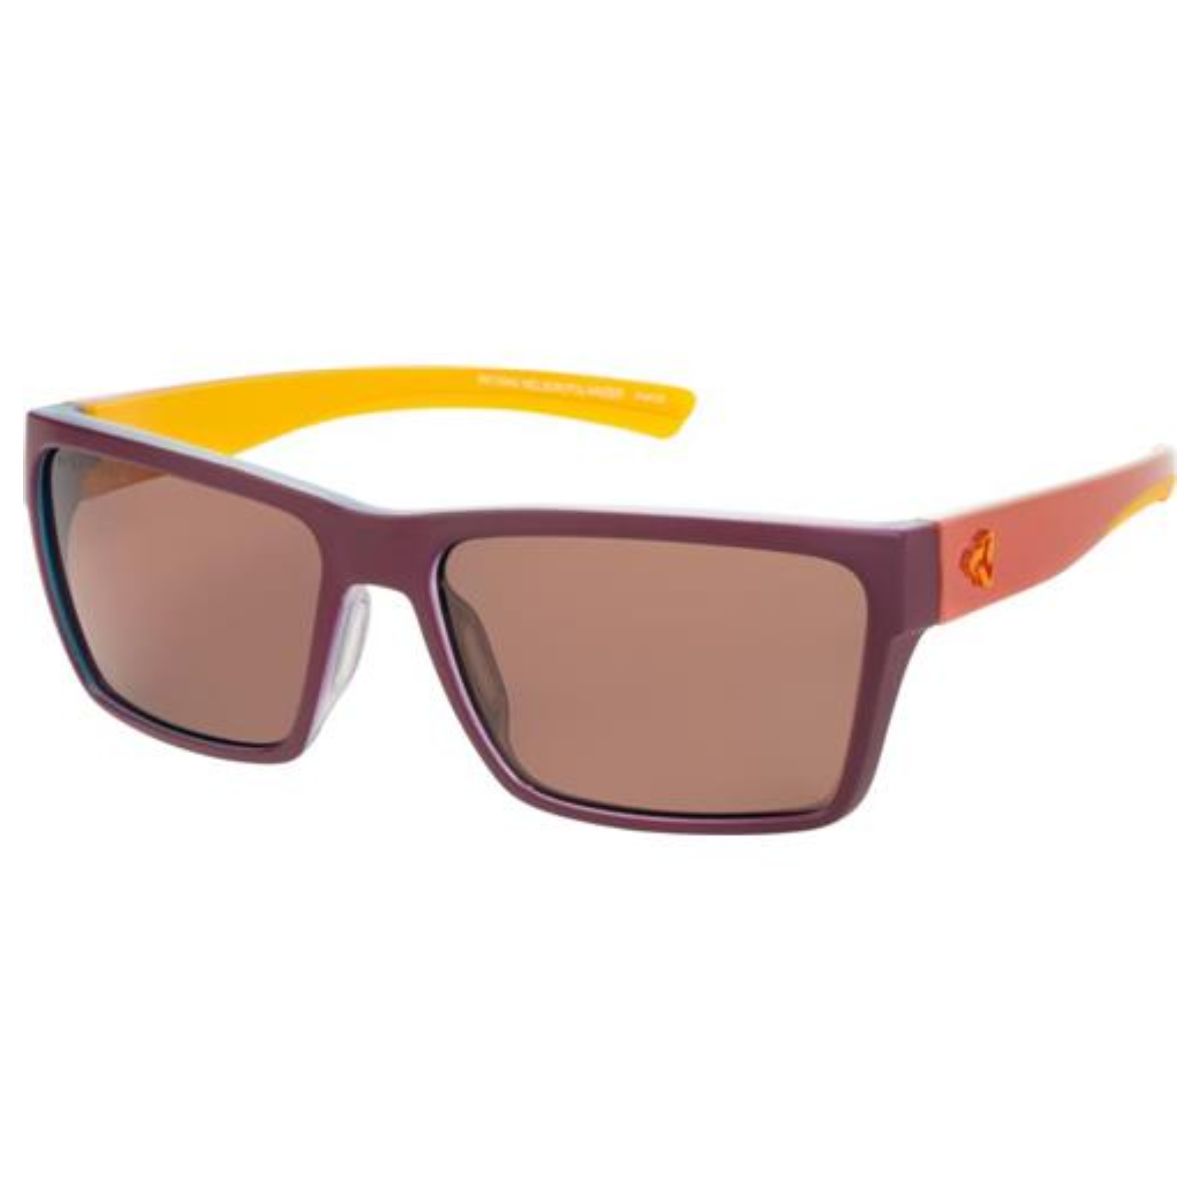 Ryders Nelson Glasses Mustard Pink - Pink Lens